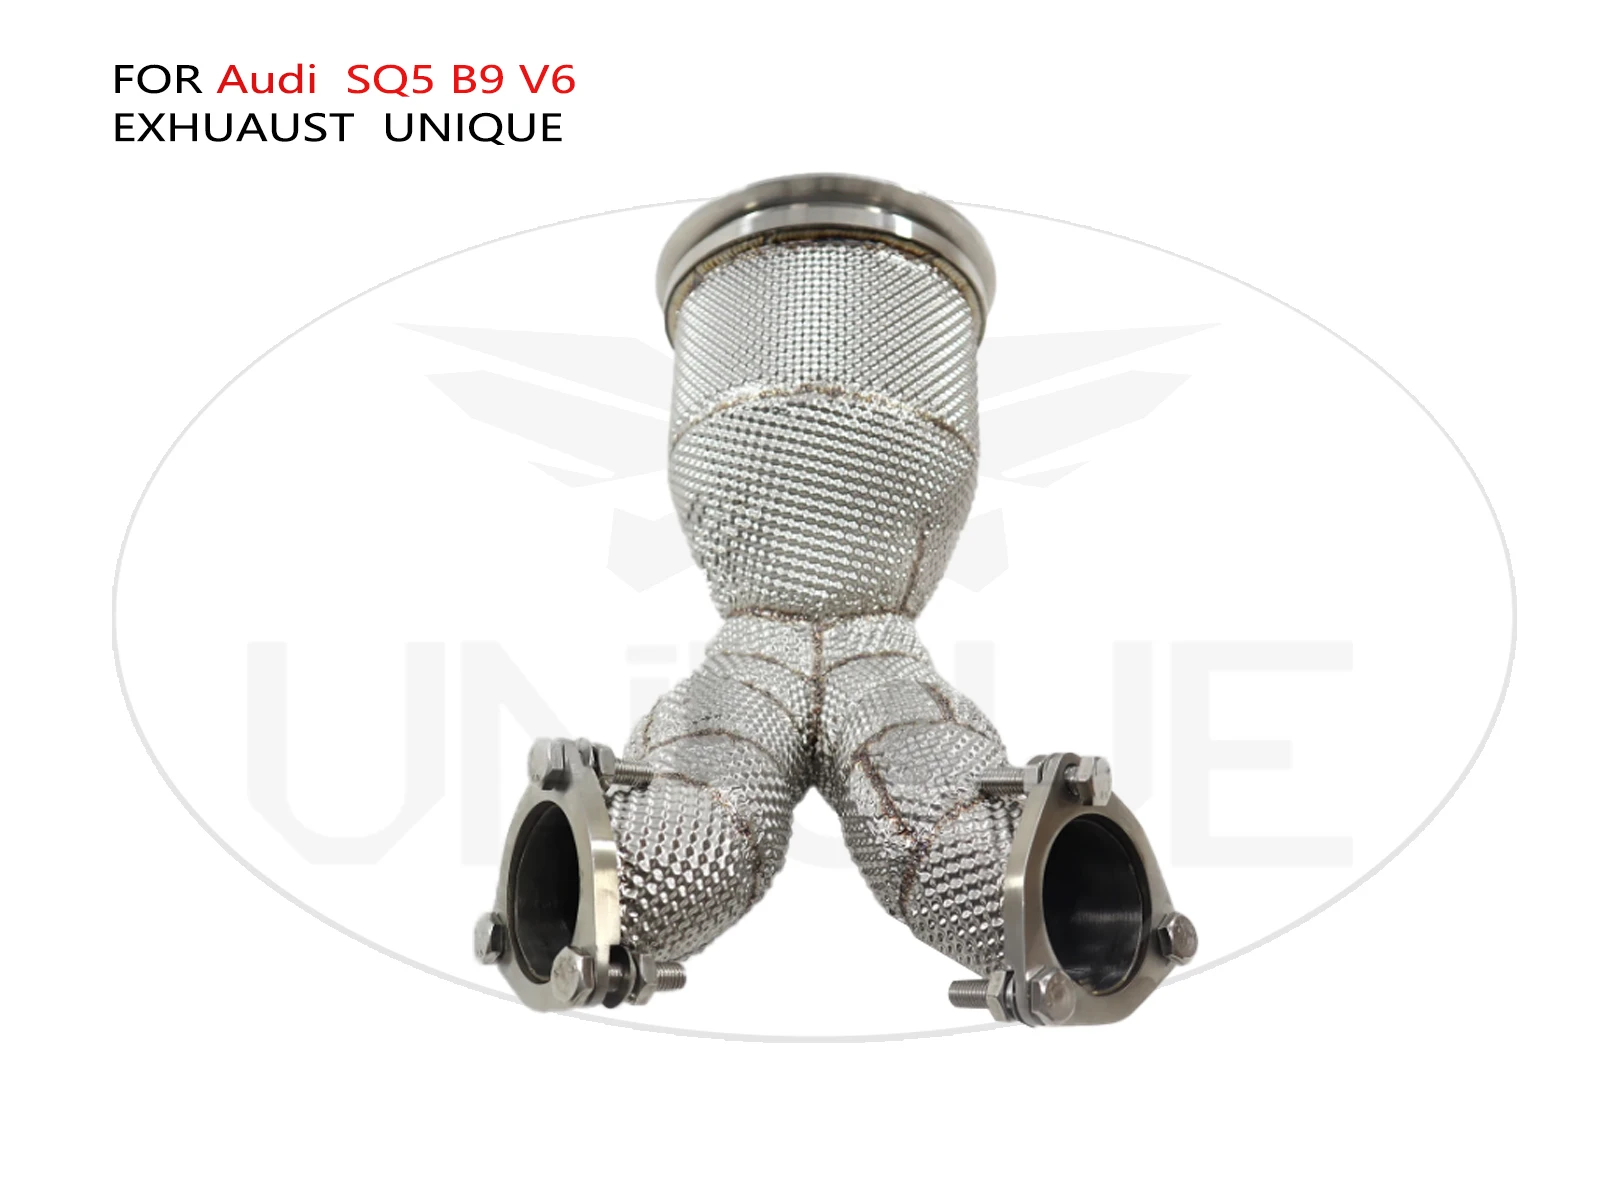 

UNIQUE Exhaust System High Flow Performance Downpipe for Audi SQ5 B9 V6 3.0T With Heat Shiled